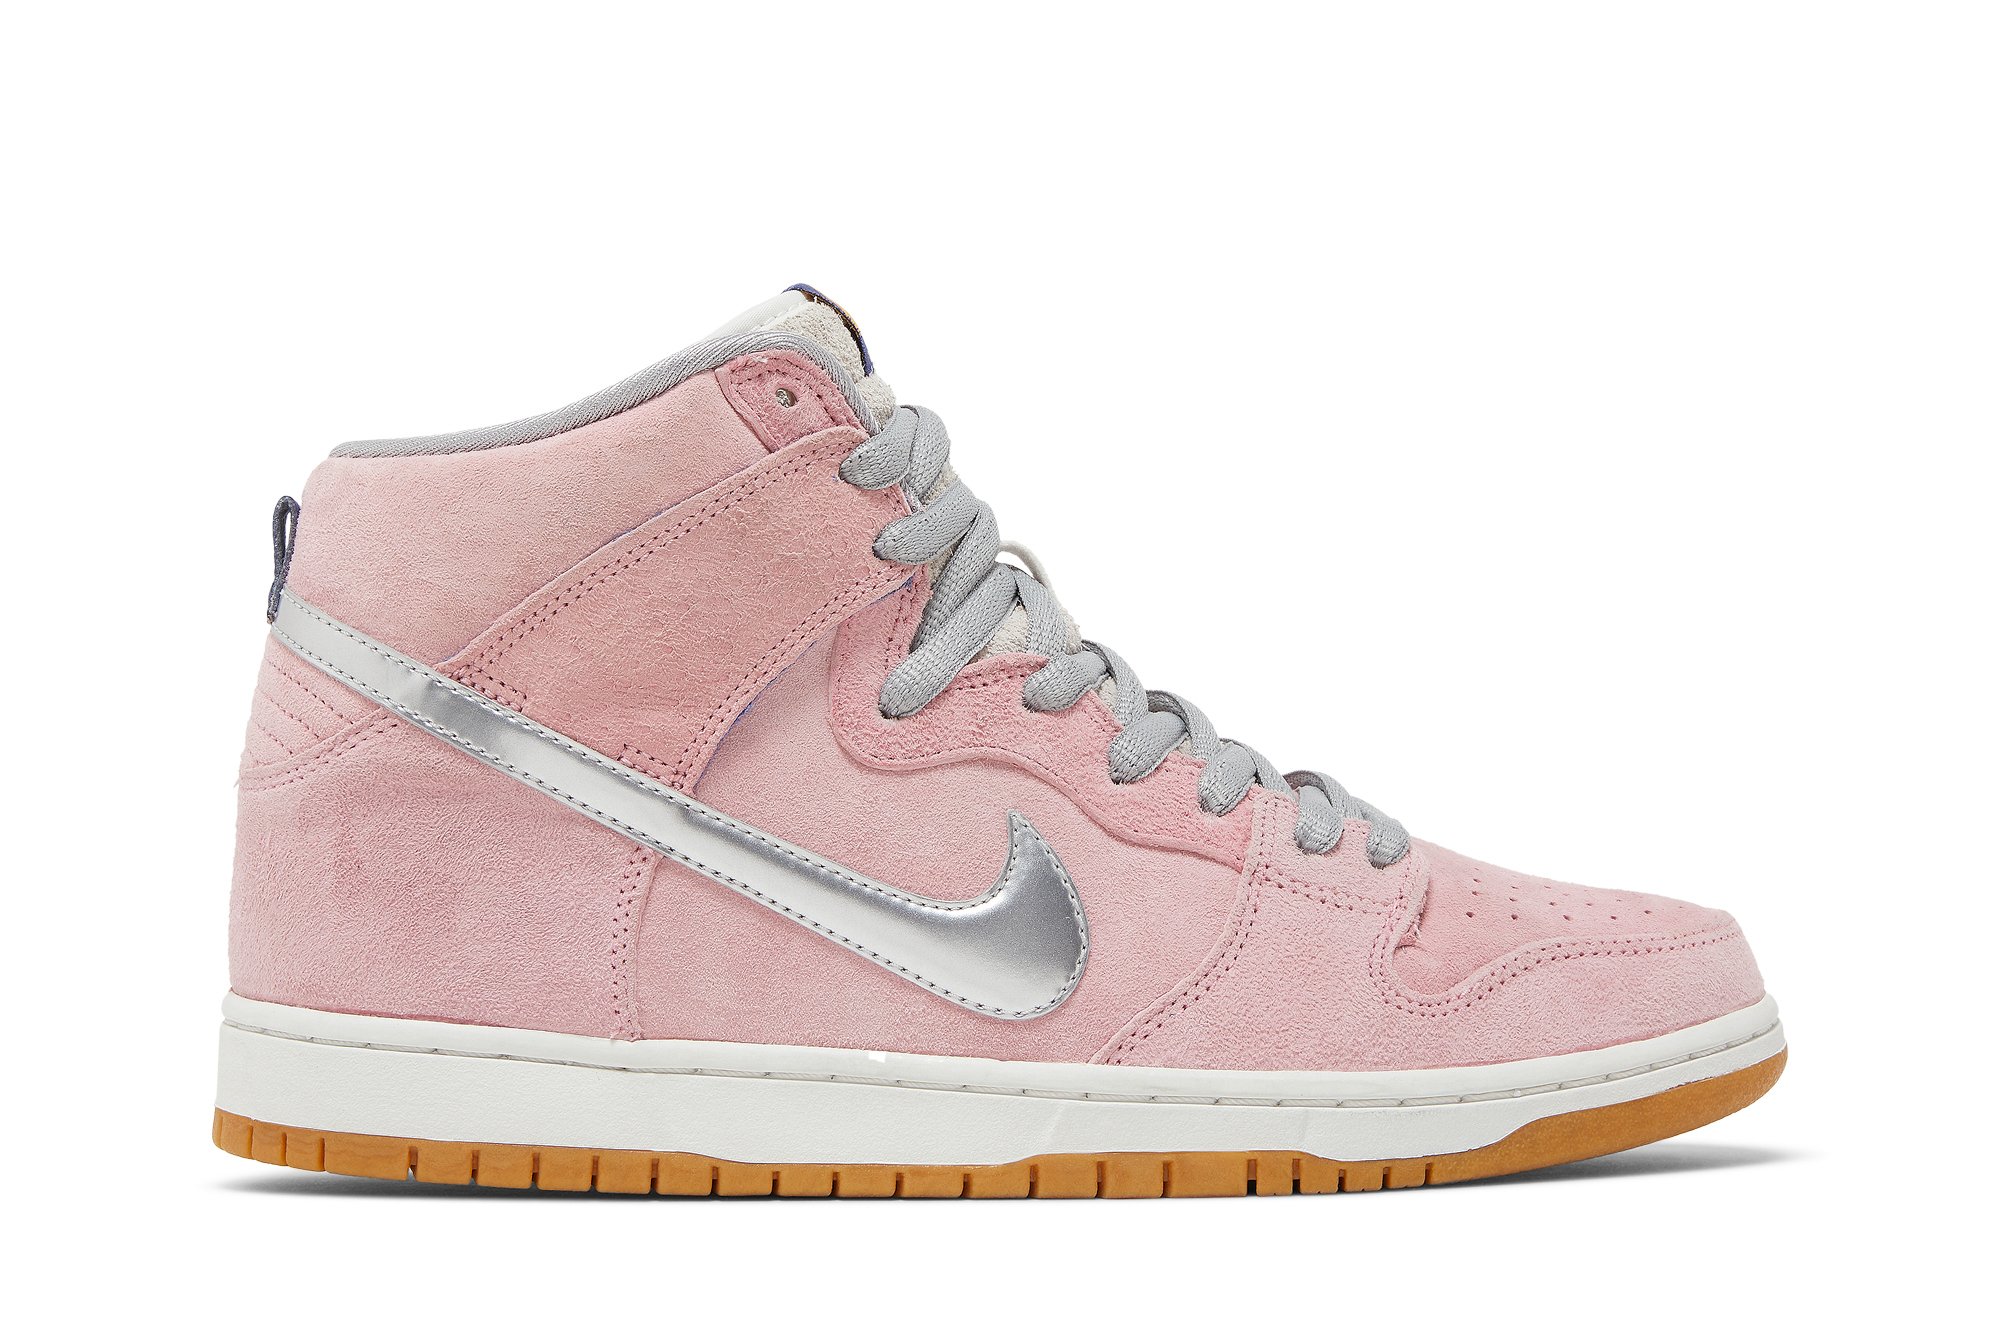 Buy Concepts x Dunk High Pro Premium SB 'When Pigs Fly' - 554673